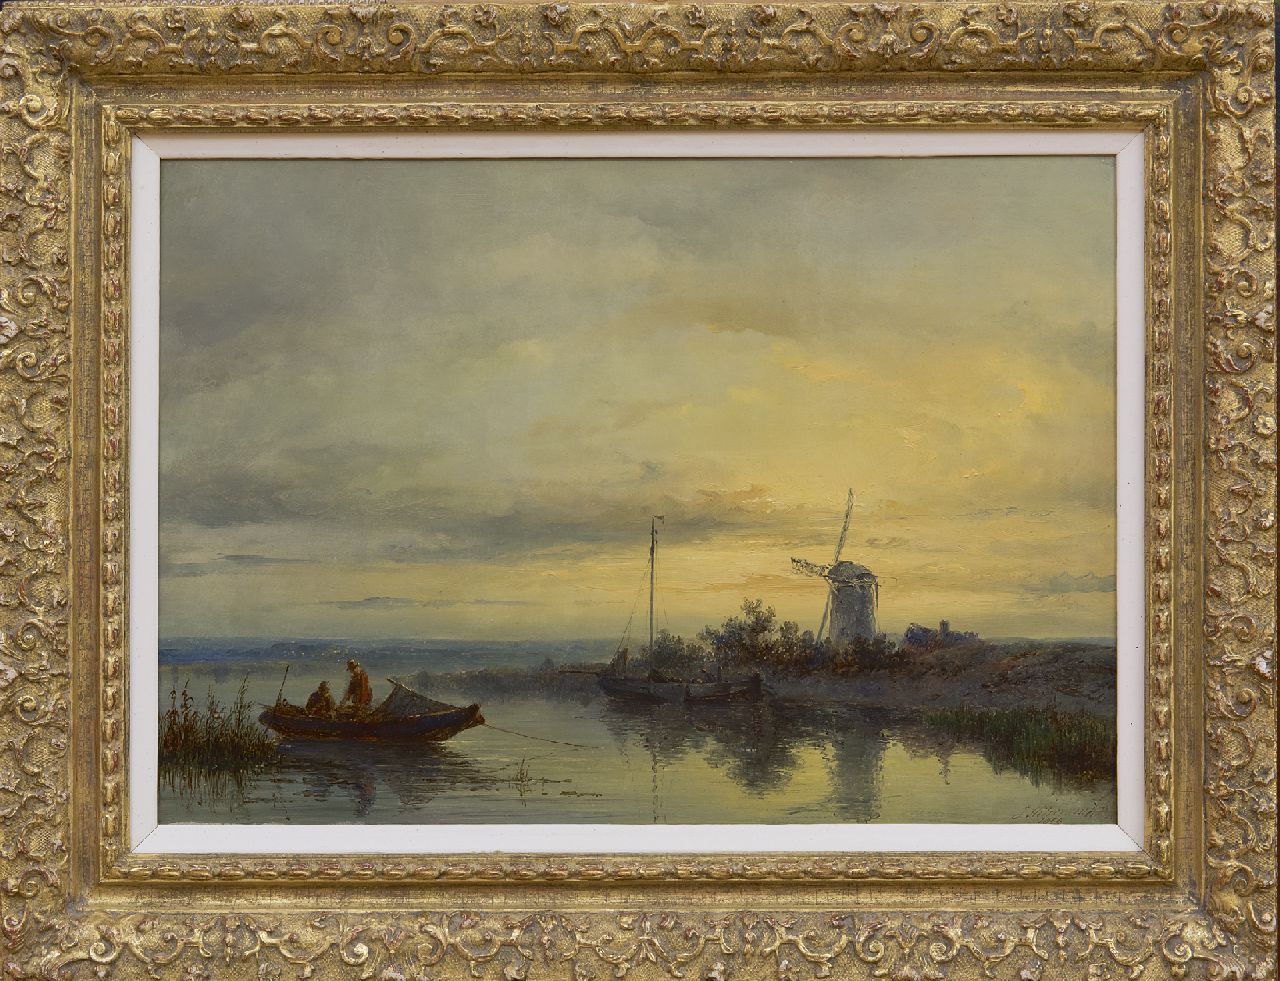 Hilverdink J.  | Johannes Hilverdink | Paintings offered for sale | A river landscape with a rowing boat and fishermen, oil on panel 31.1 x 44.5 cm, signed l.r. and dated 1869